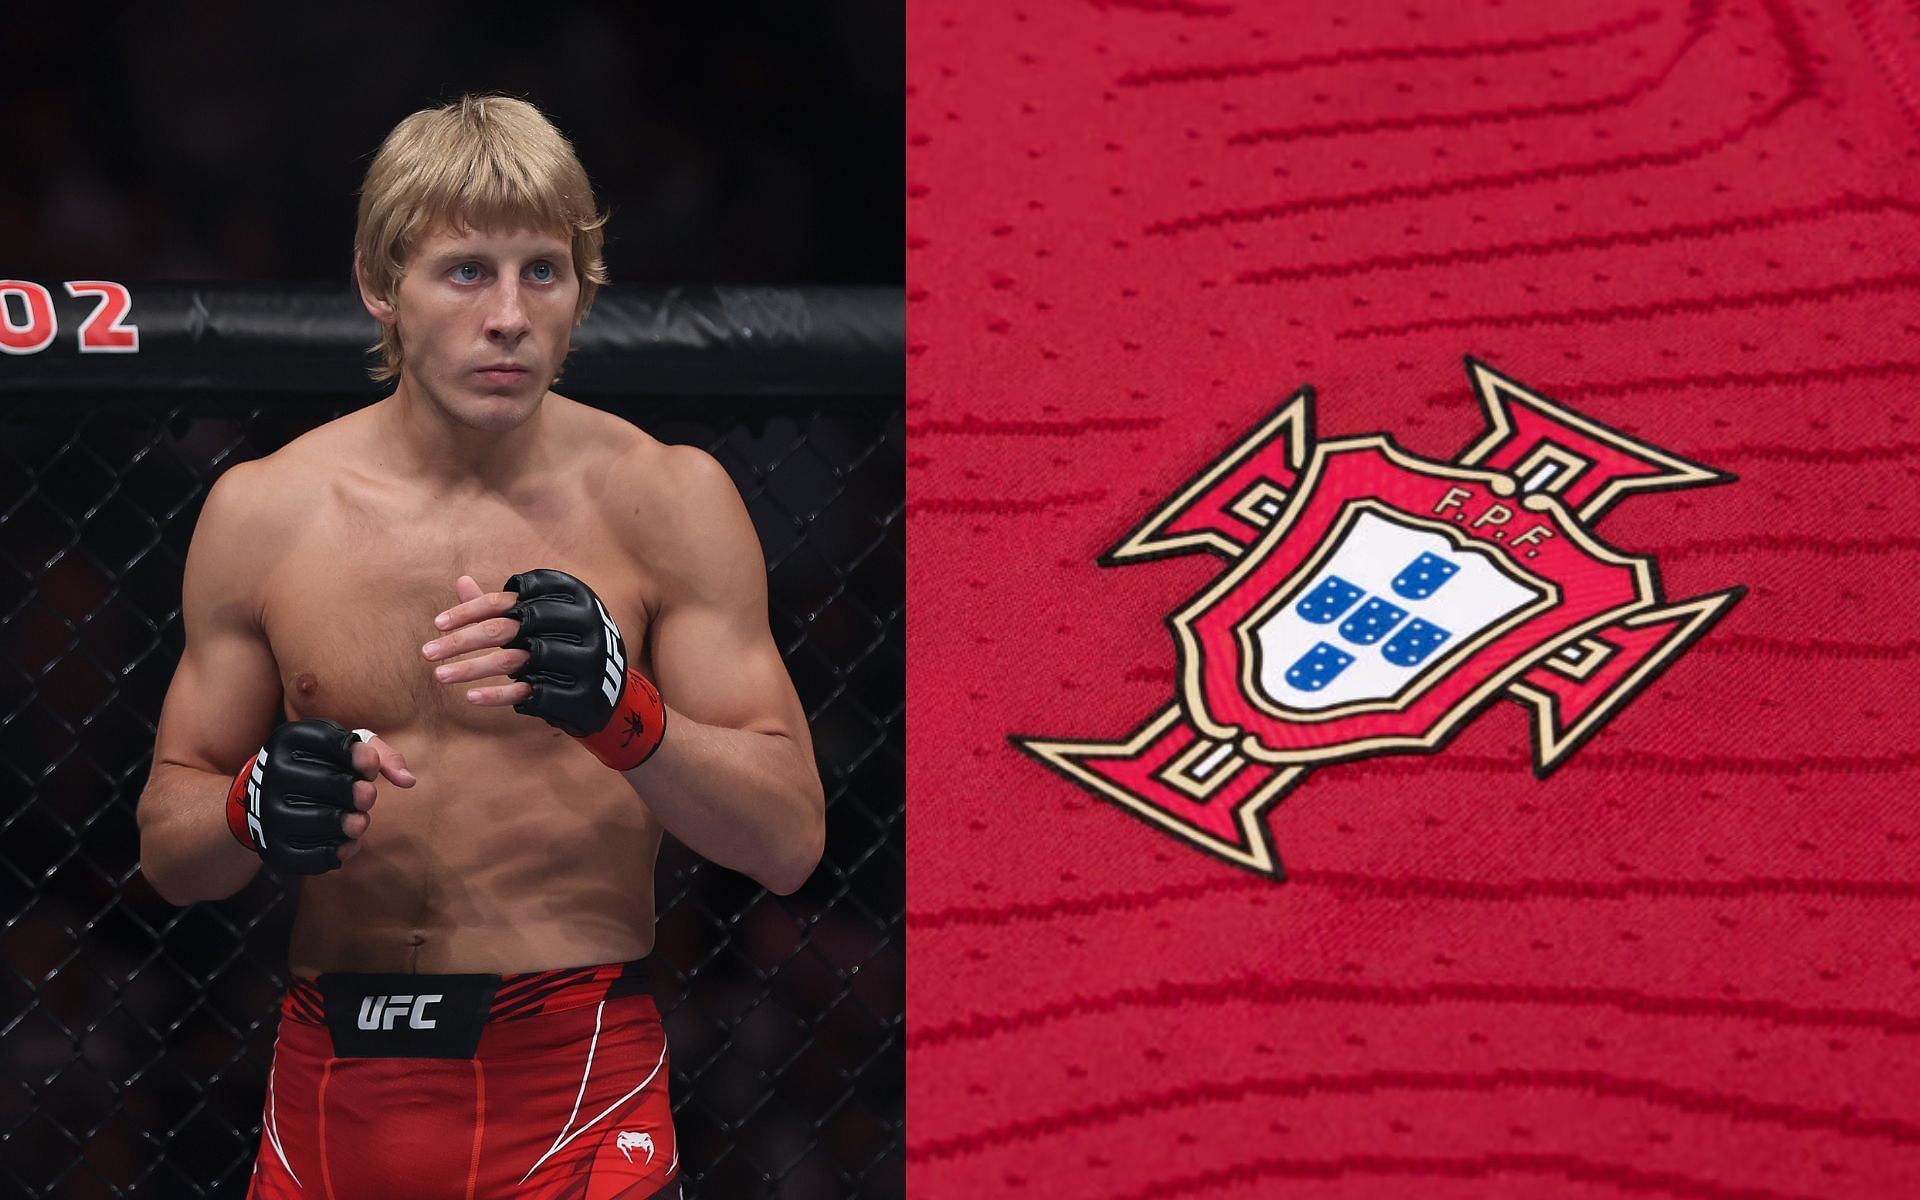 Paddy Pimblett (left) and Portugal national football team crest (right). [Images courtesy: left image from Getty Images and right image from Nike]